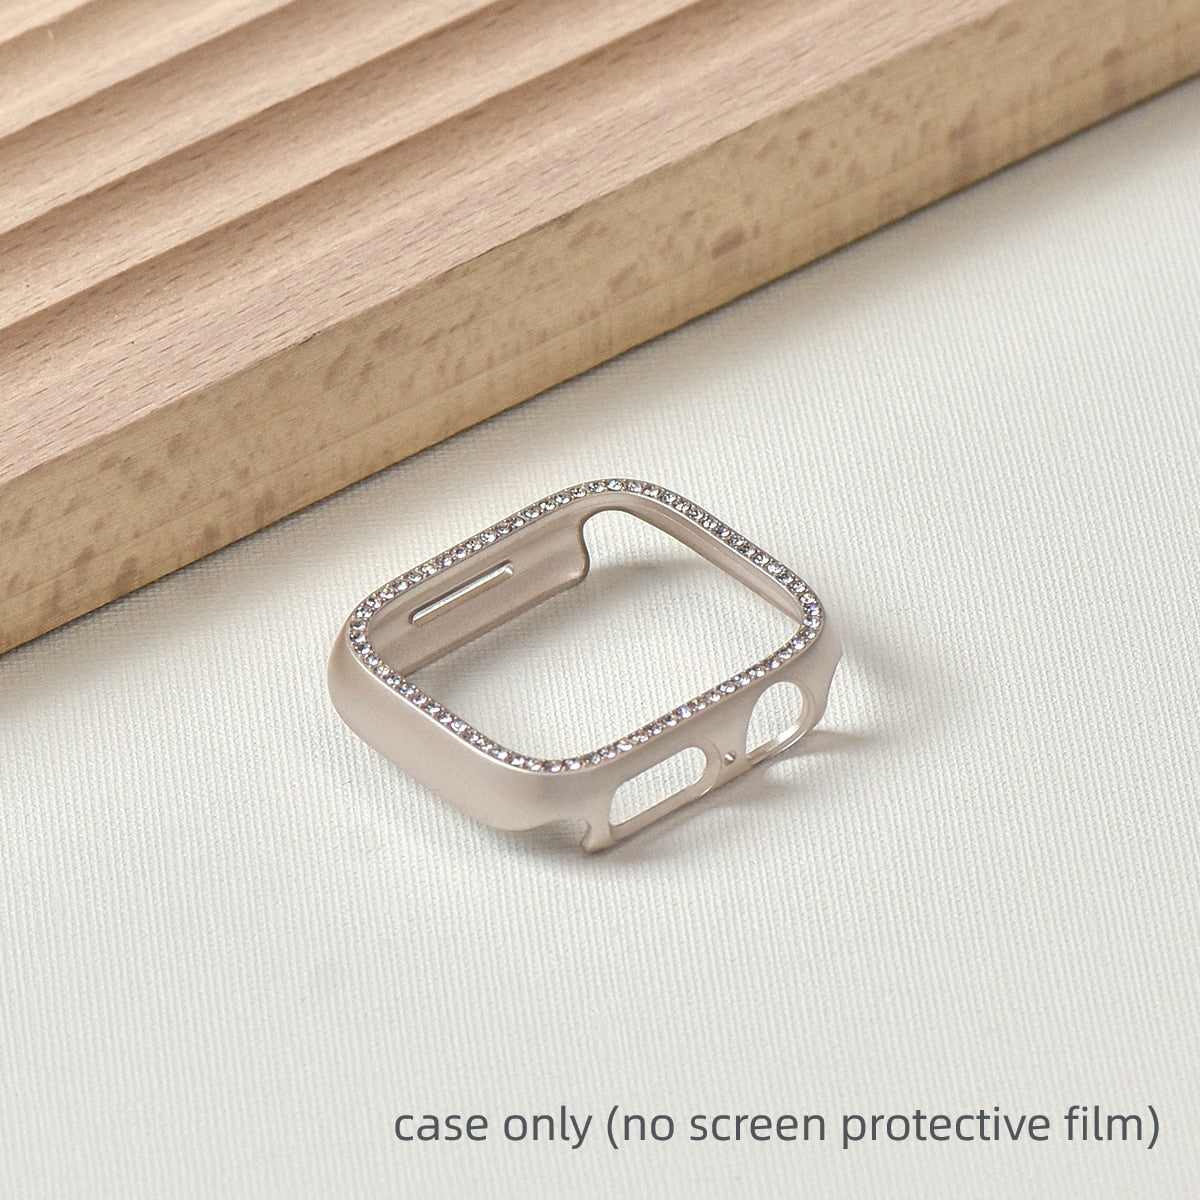 Hard PC Starlight Cover For Apple Watch Case 41mm 45mm 7 8 6 5 42MM 38MM 3 2 SE 40mm 44mm Protector Bumper for iwatch Case 49mm - Starlight 03 / Series123 38MM - Starlight 03 / Series123 42MM - Starlight 03 / Series456 SE 40MM - Starlight 03 / Series456 SE 44MM - Starlight 03 / Series78 41MM - Starlight 03 / Series78 45MM - Starlight 03 / Ultra 49mm